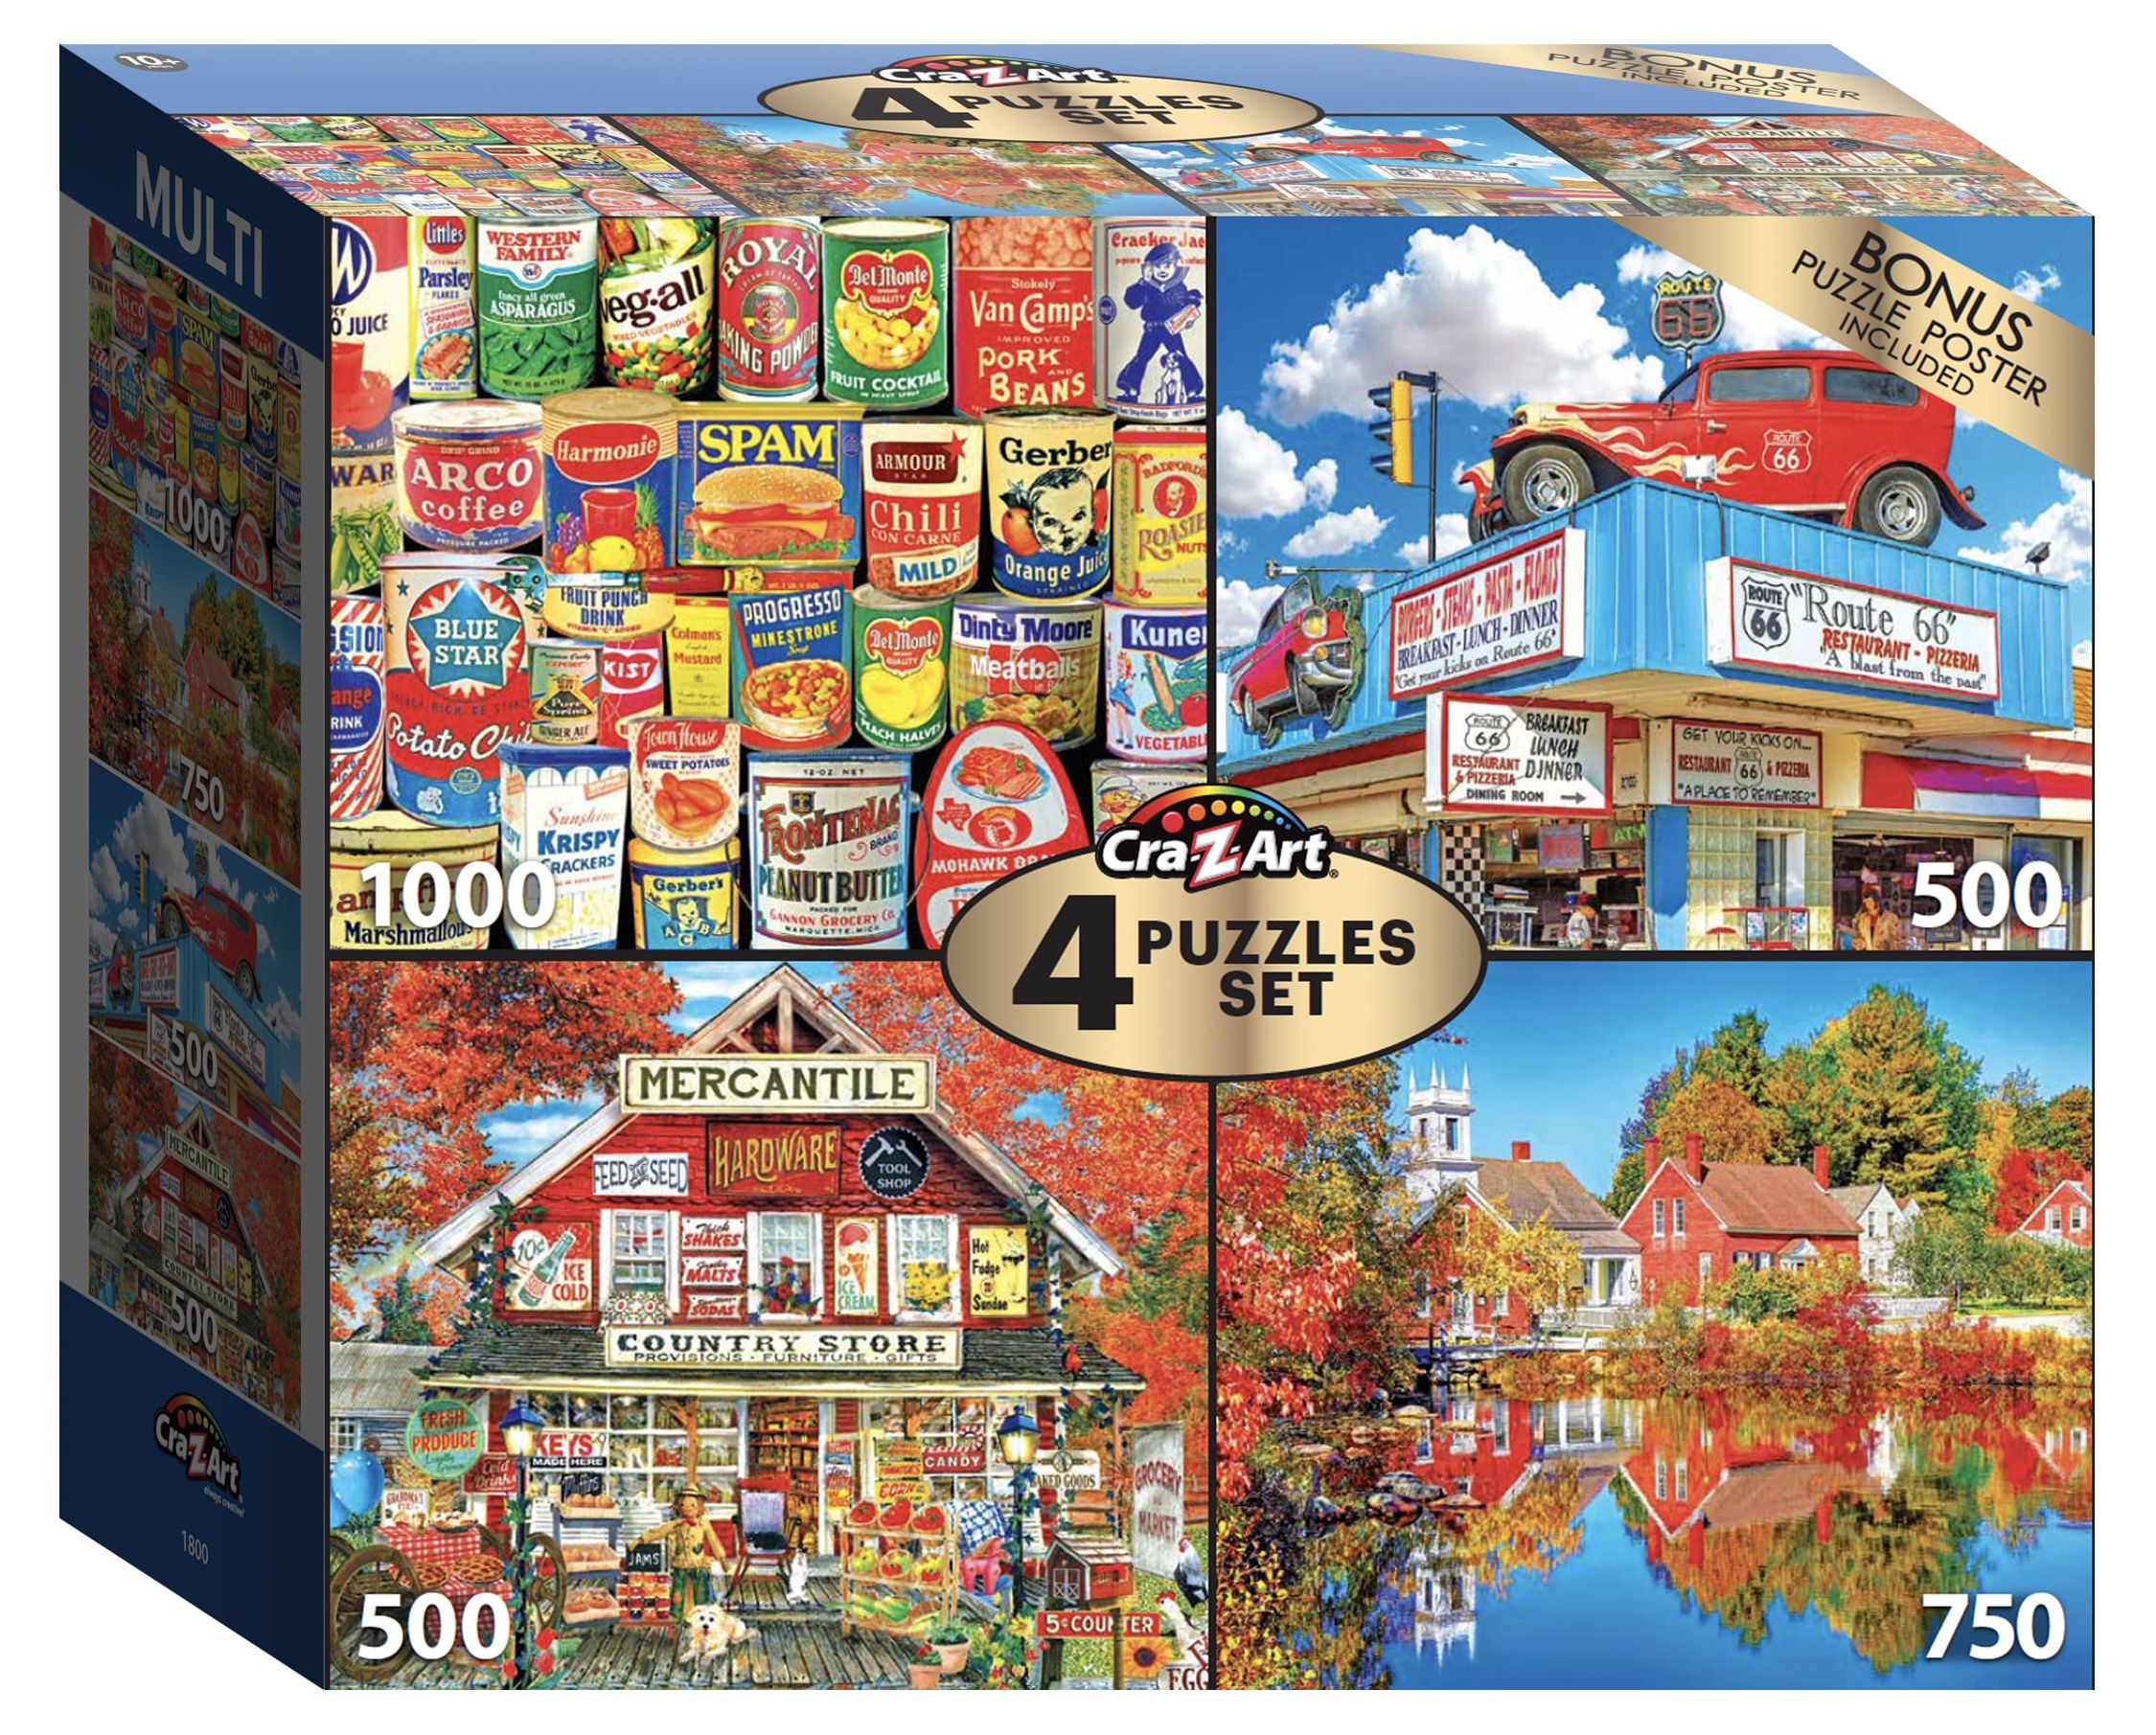 4 Puzzle Pack Wal Mart Cra-Z-Art 4 in 1 Pack Retro ONE 1000, TWO 500 and ONE 750 piece puzzles. $4.86 Free Delivery Was Mart+